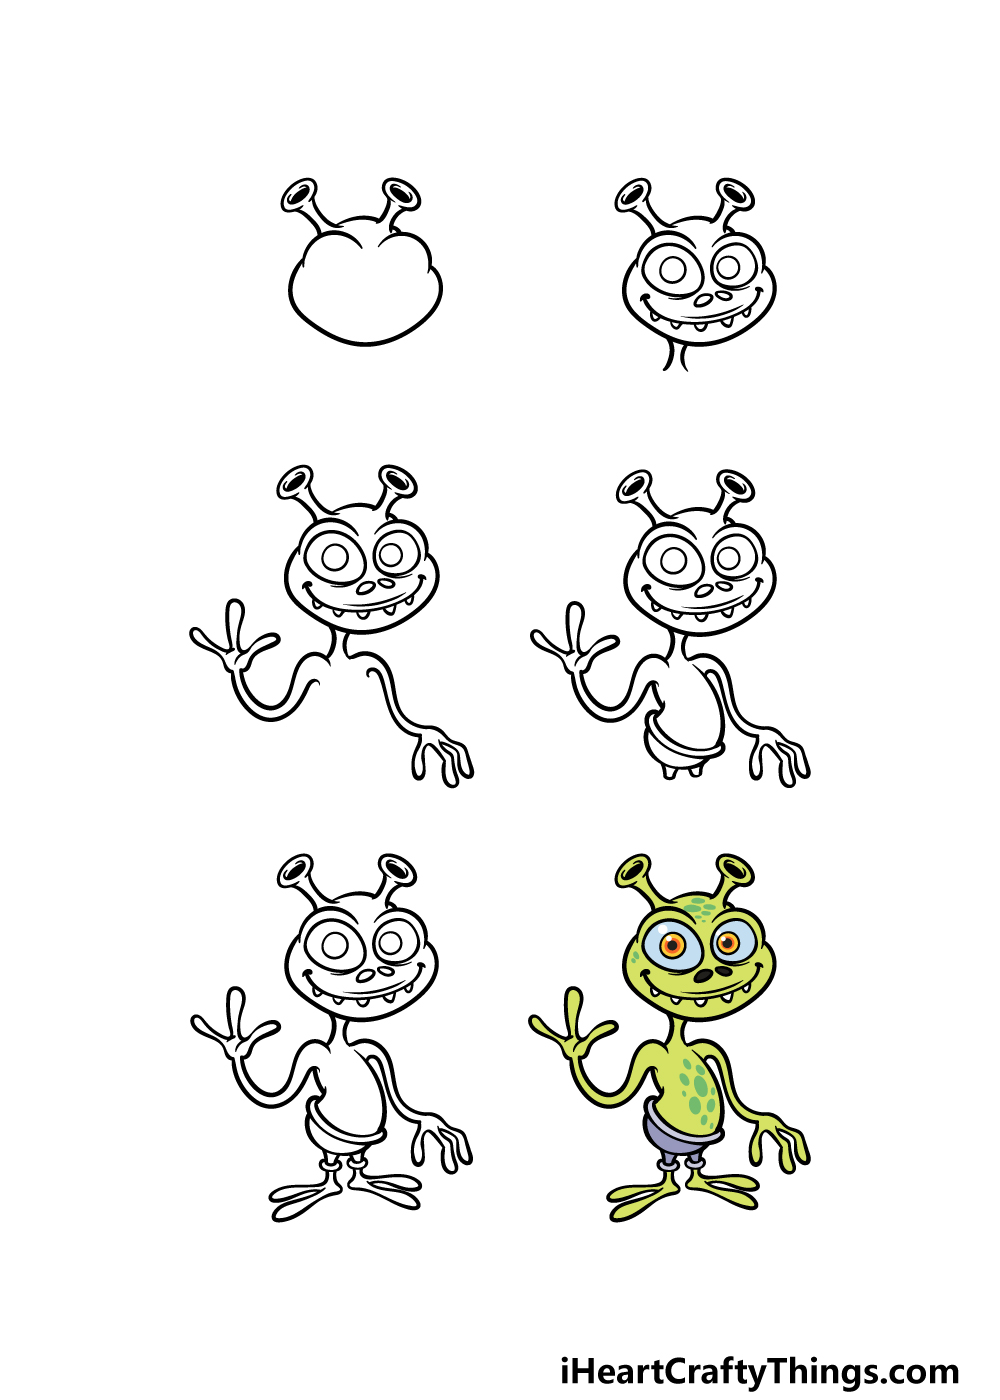 how to draw a Cartoon Alien in 6 steps